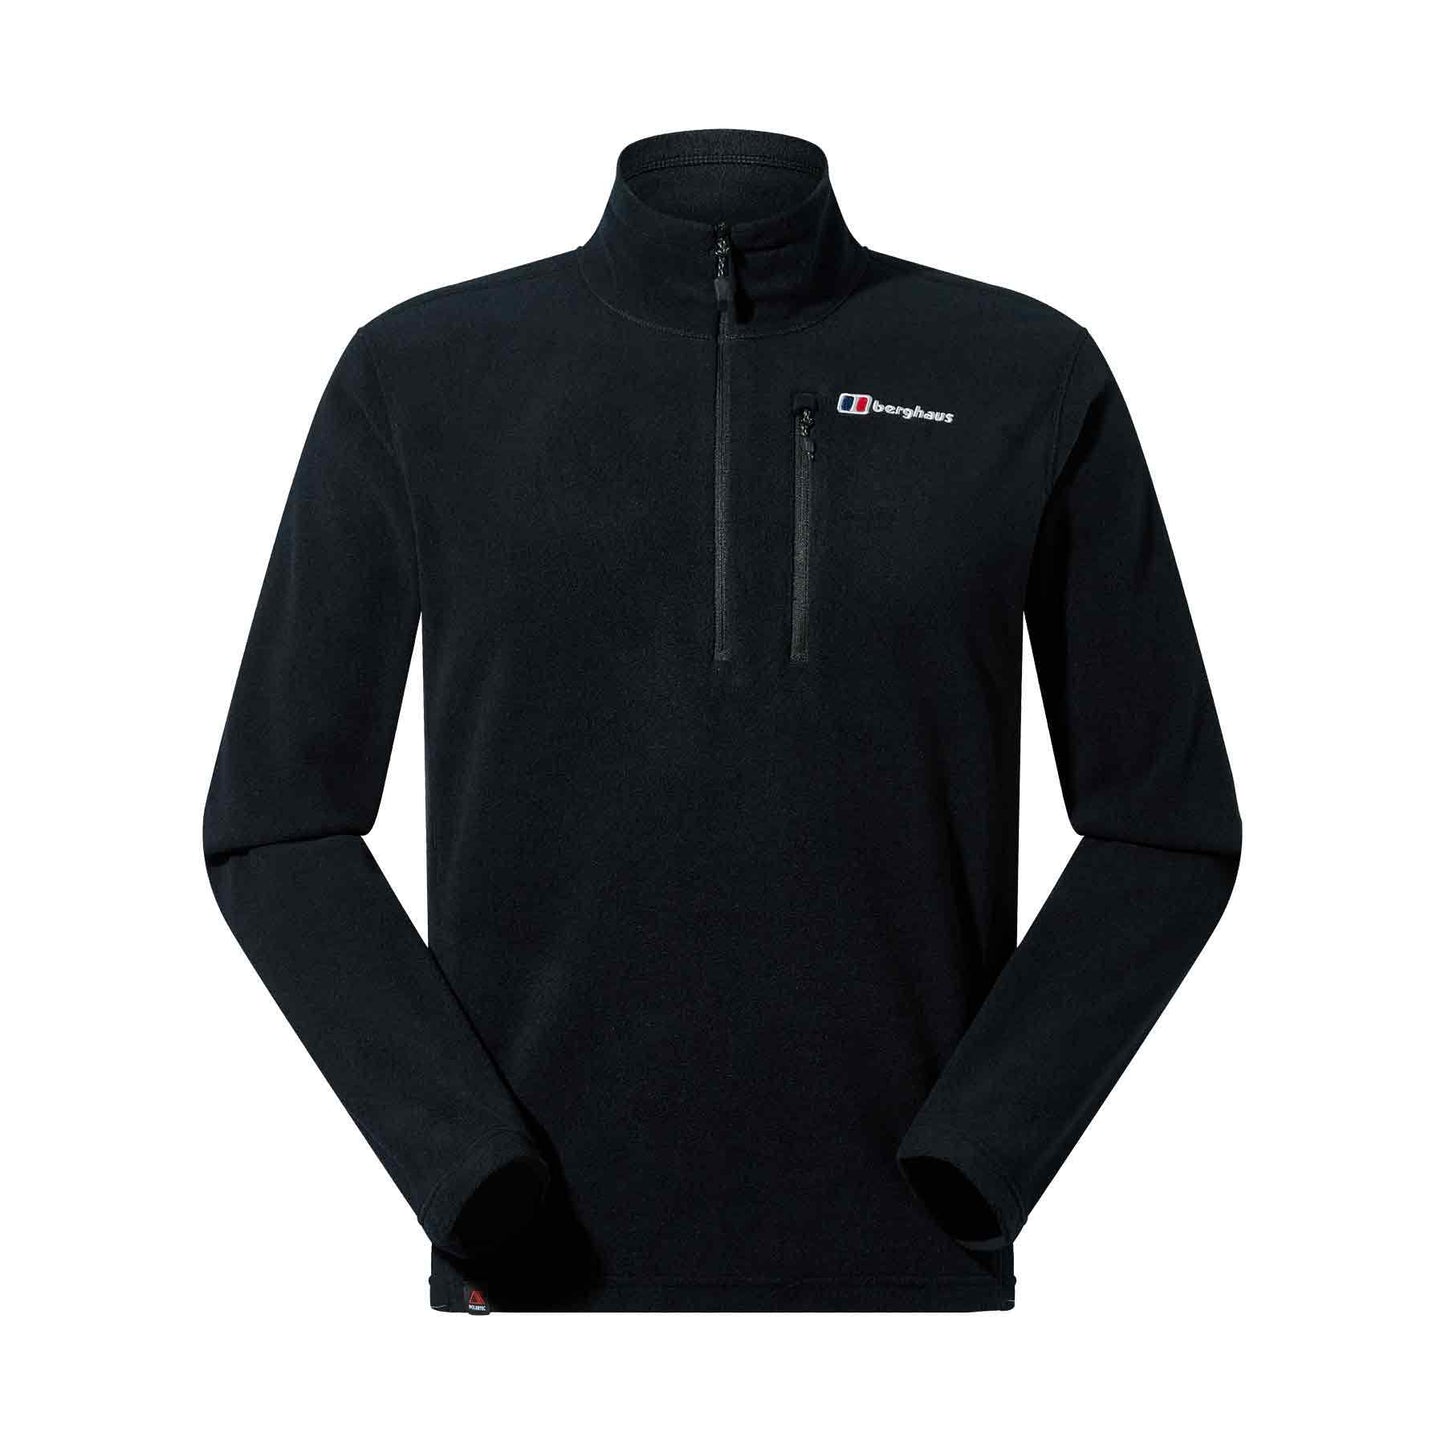 Berghaus Men’s Prism Micro PT FL Hzip - The Luxury Promotional Gifts Company Limited